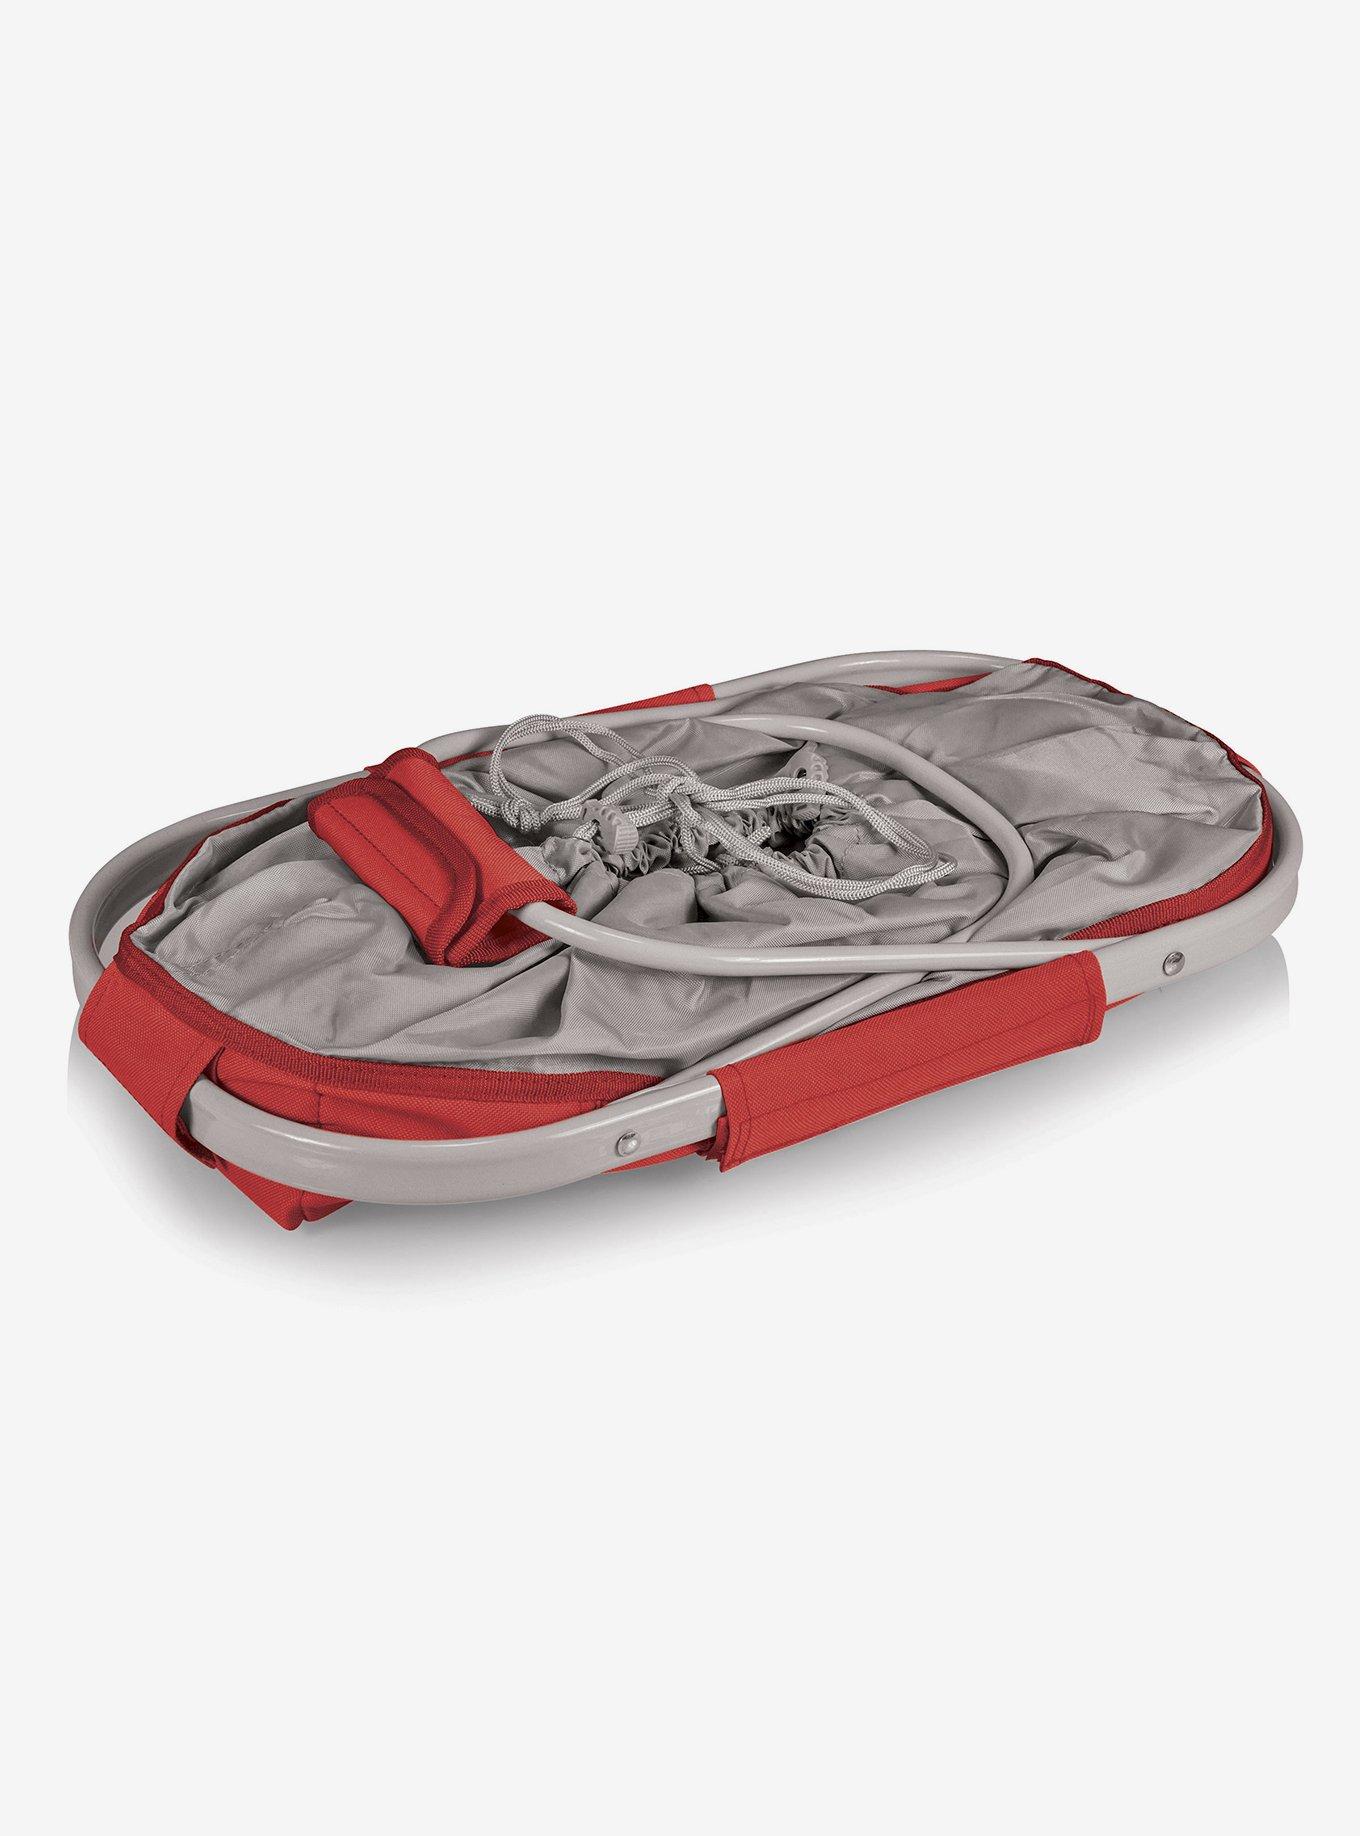 Disney Mickey Mouse Collapsible Cooler Tote, , alternate